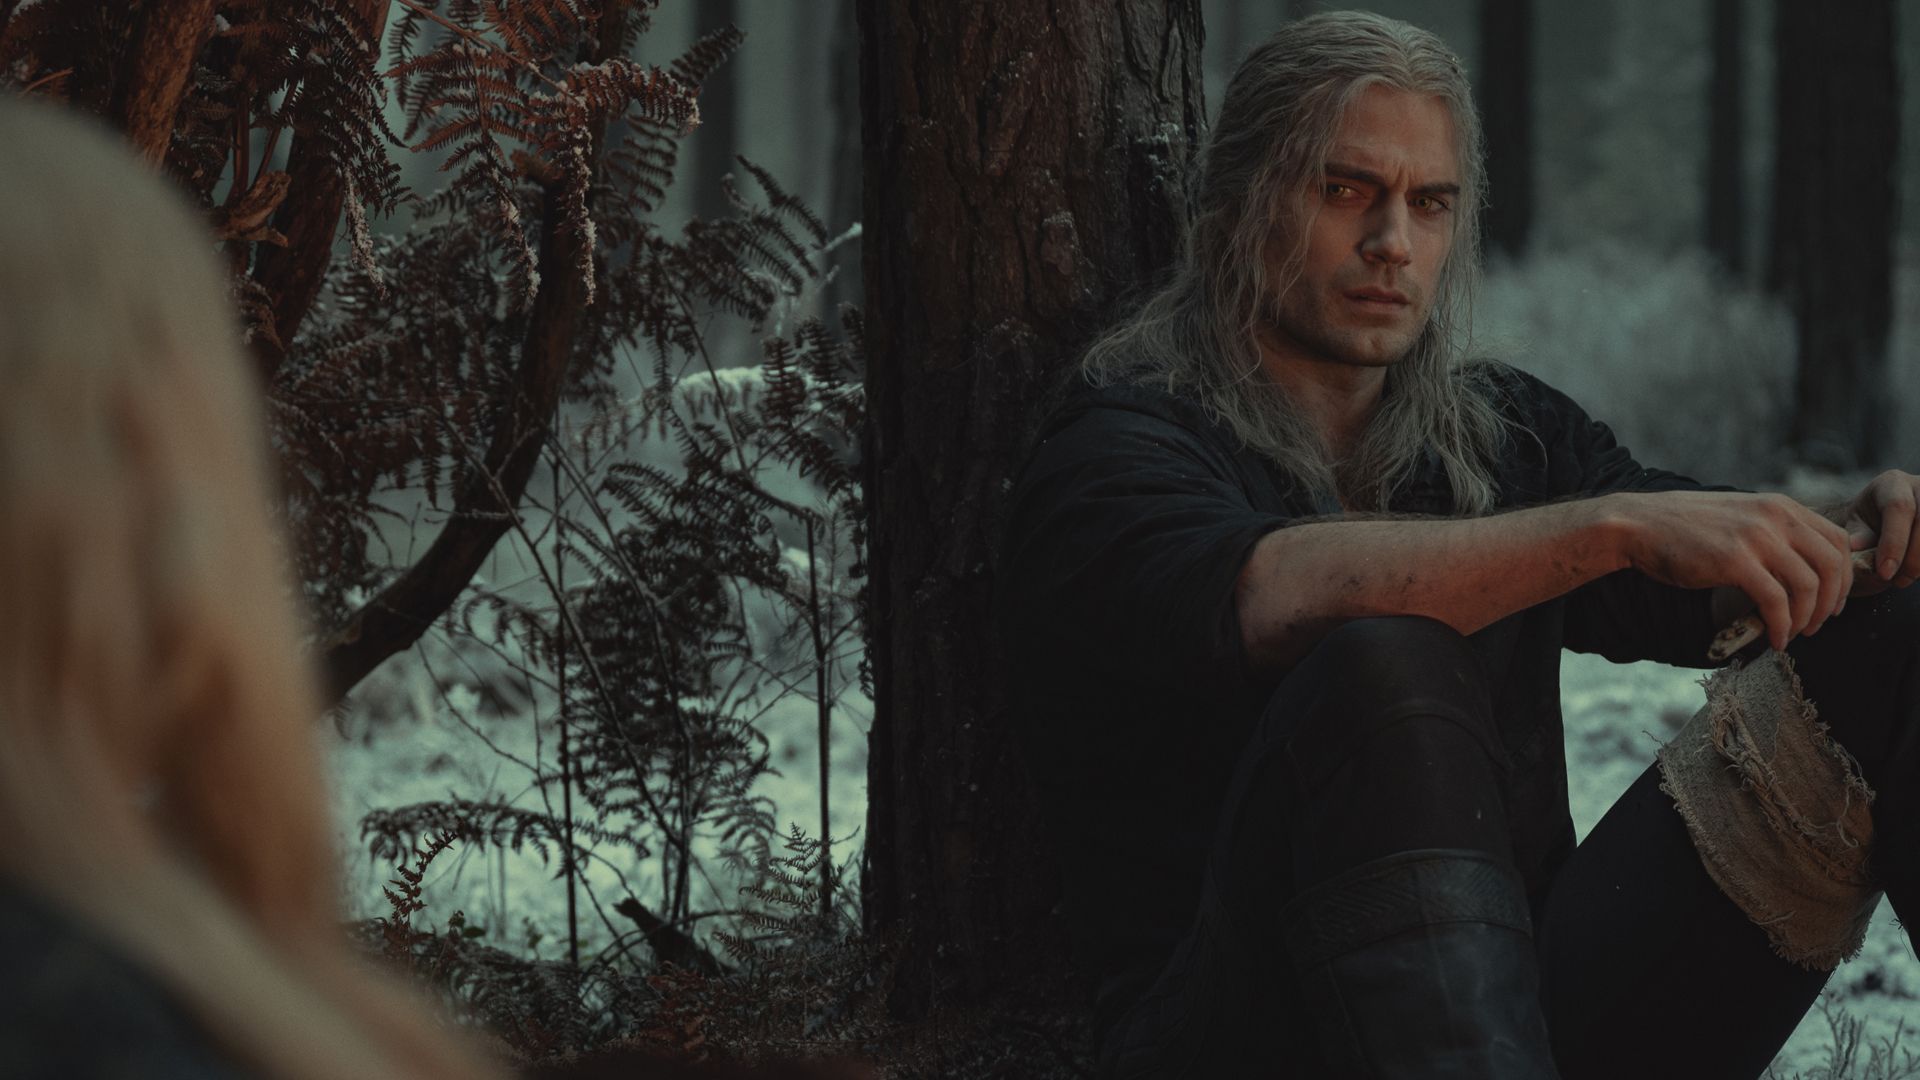 The Witcher season 3 will be released sooner than you think TechRadar